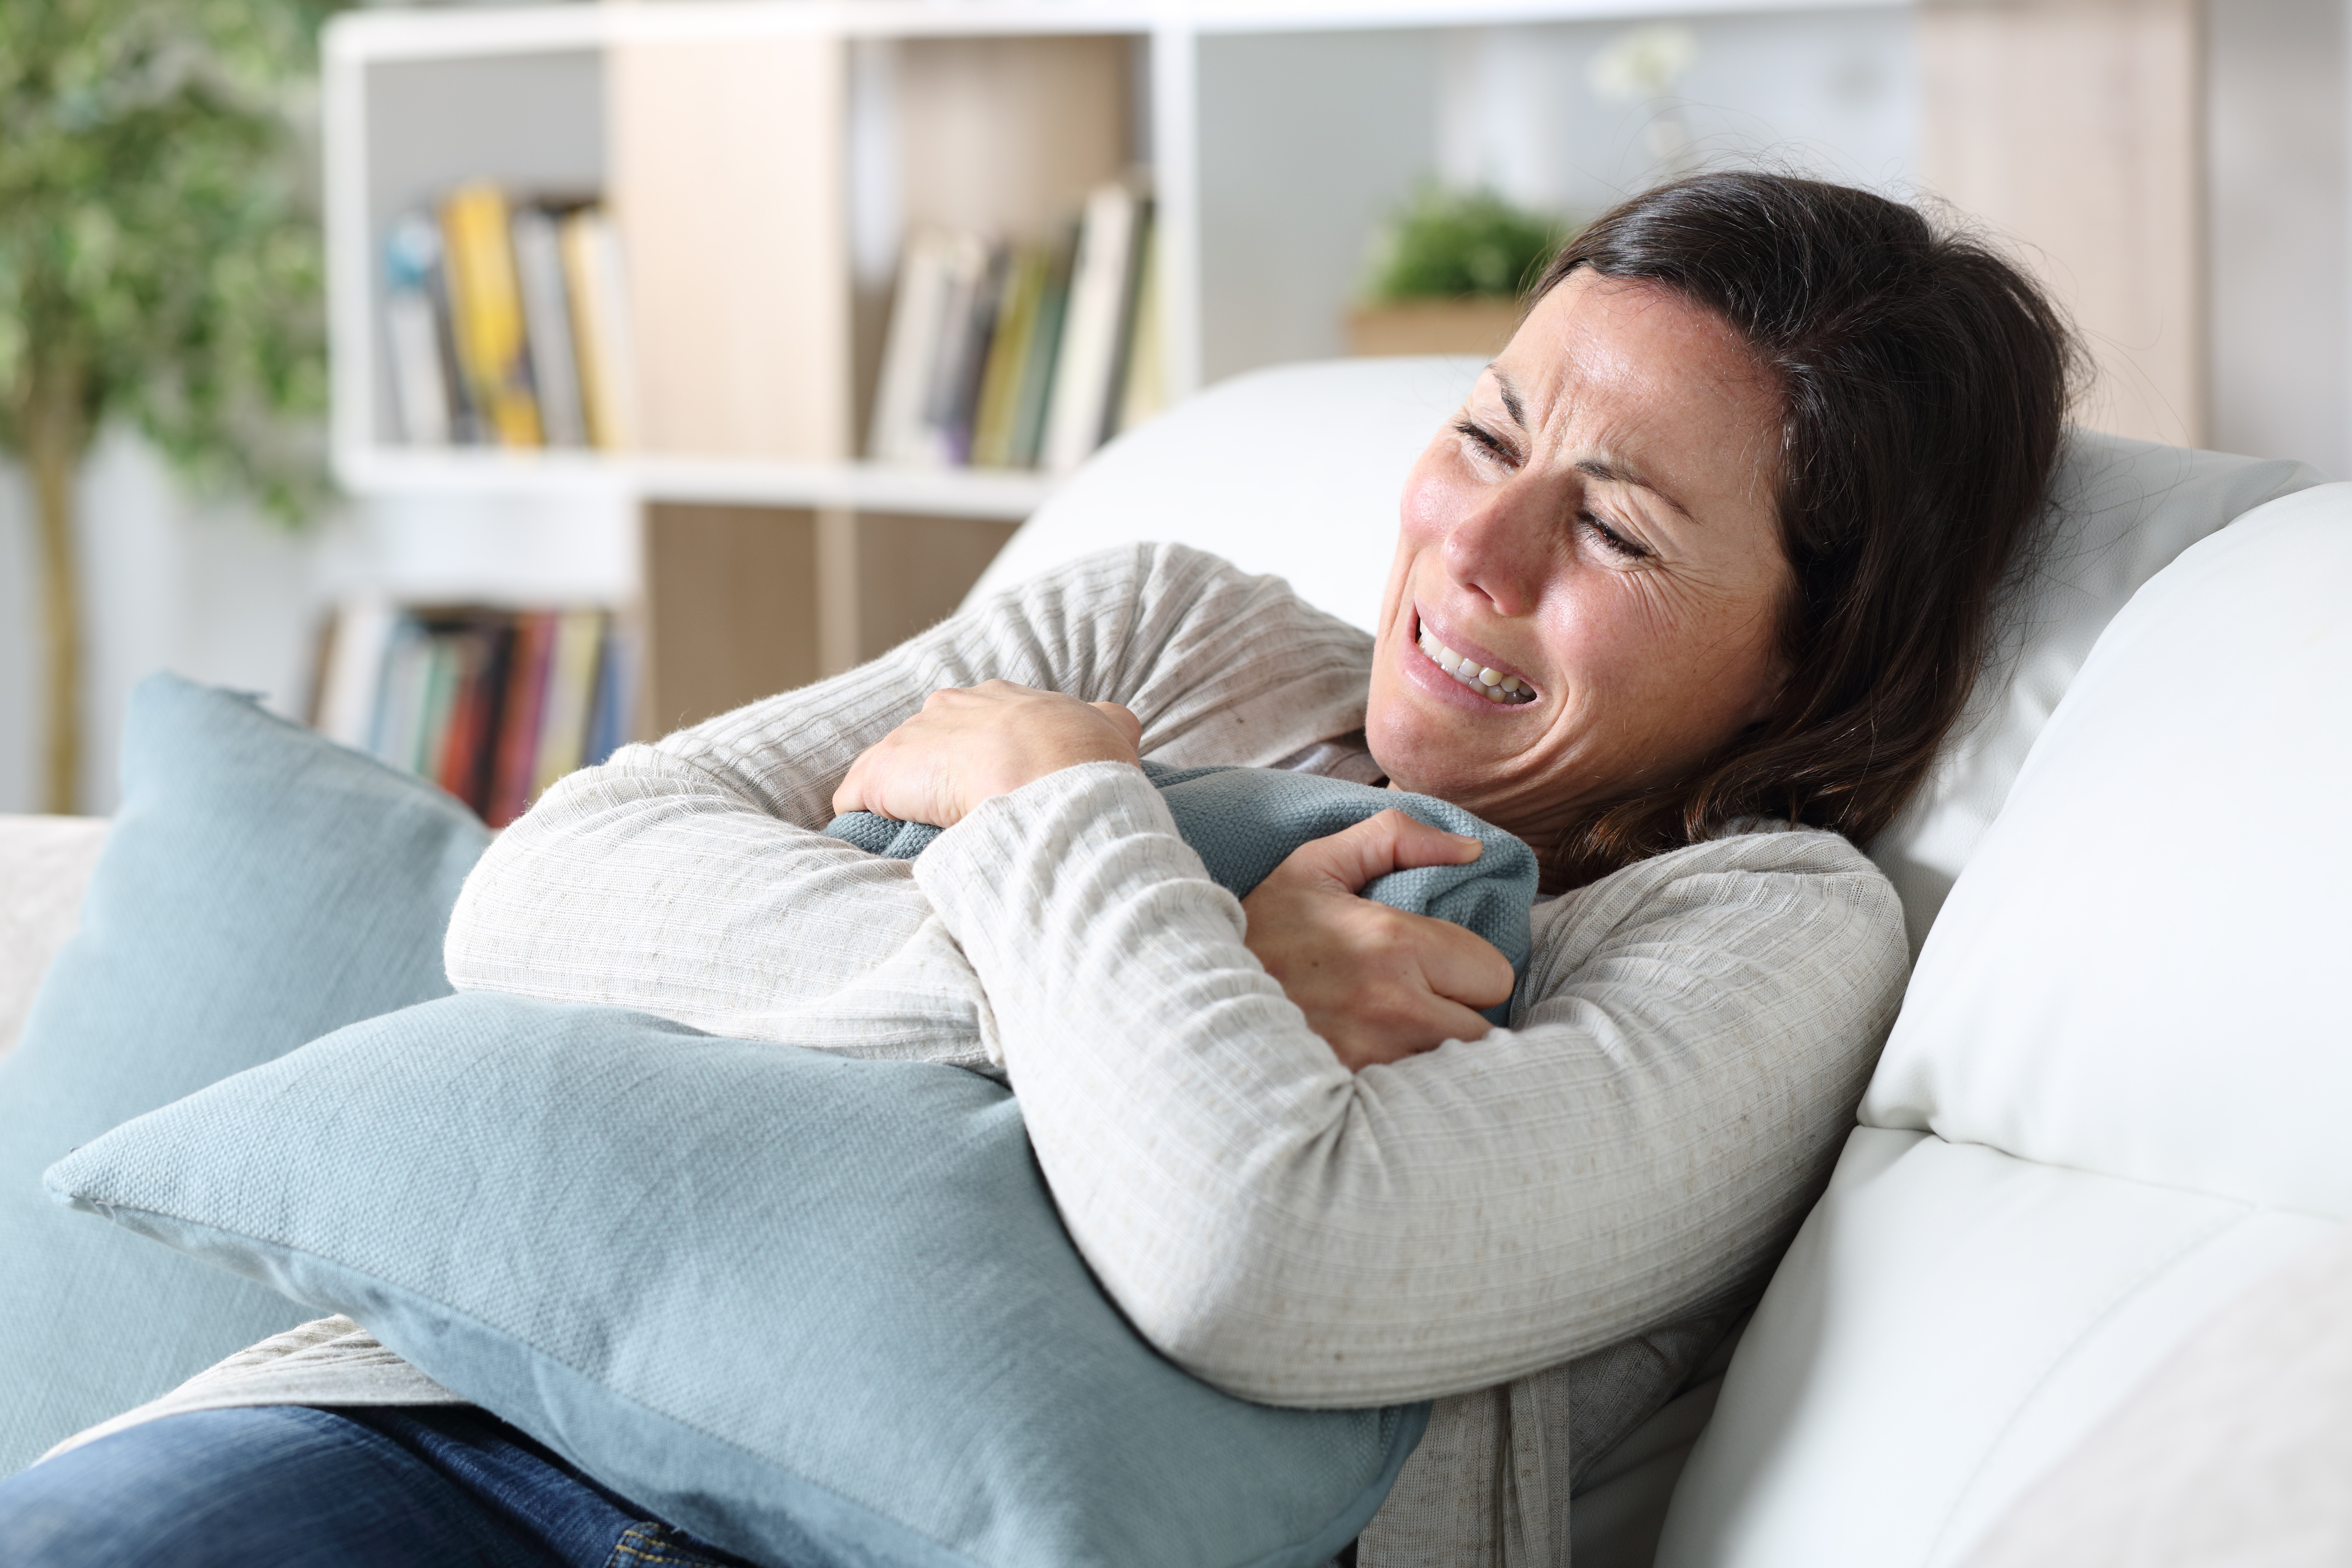 Sad adult woman crying sitting on the sofa holding pillow in the living room at home | Source: Shutterstock.com